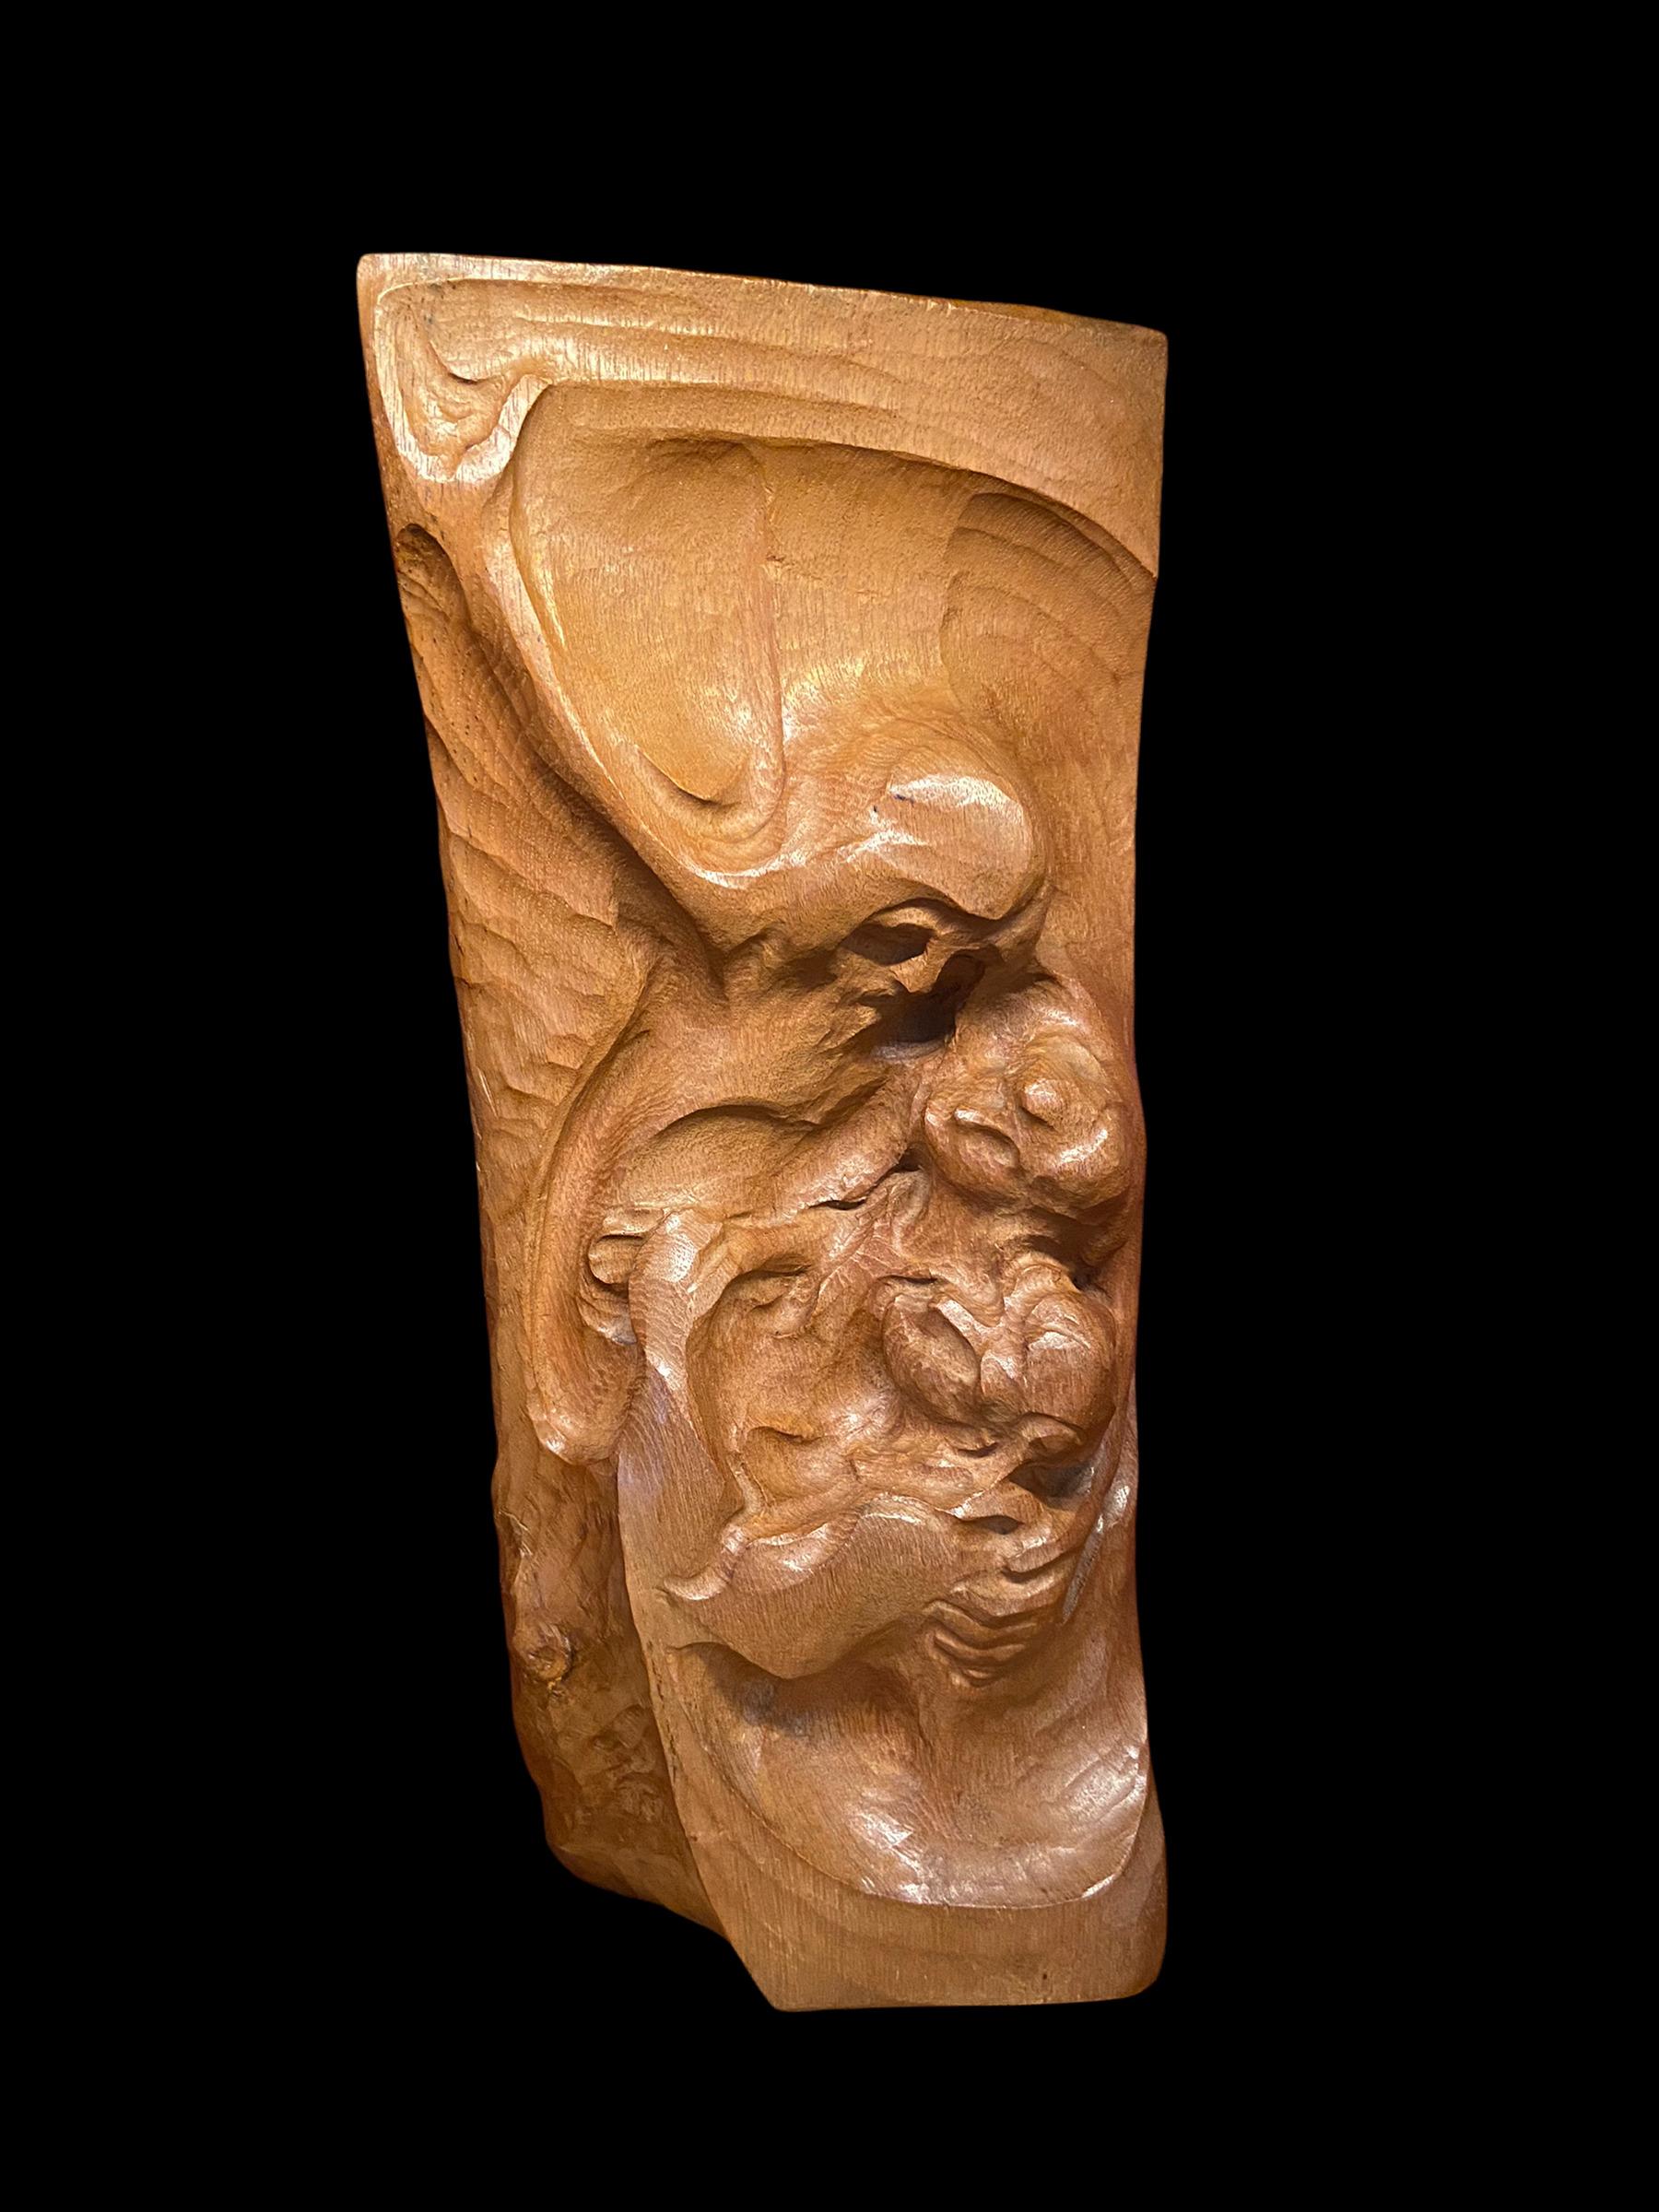 Wooden sculpture by Pieter Biesiot(1890-1980 Driebergen Holland) depicting “Descent from the cross”. Made of oak in the 1930s. Pieter Biesiot sought to approach the essence of things with extremely simple forms. This piece of art is in a very good